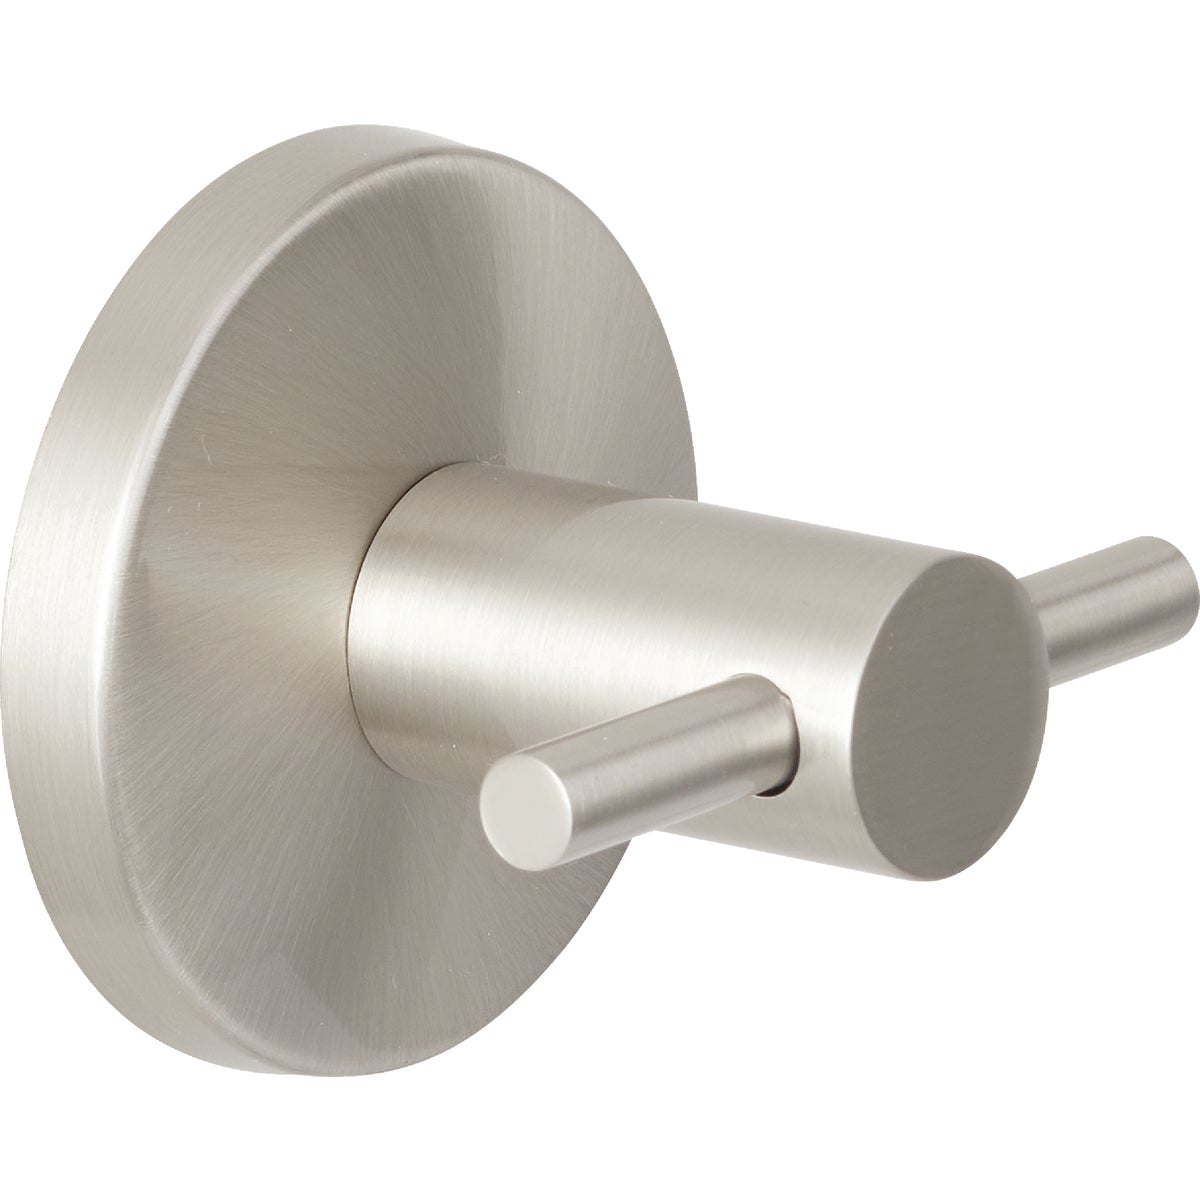 Home Impressions Trition Brushed Nickel Robe Hook